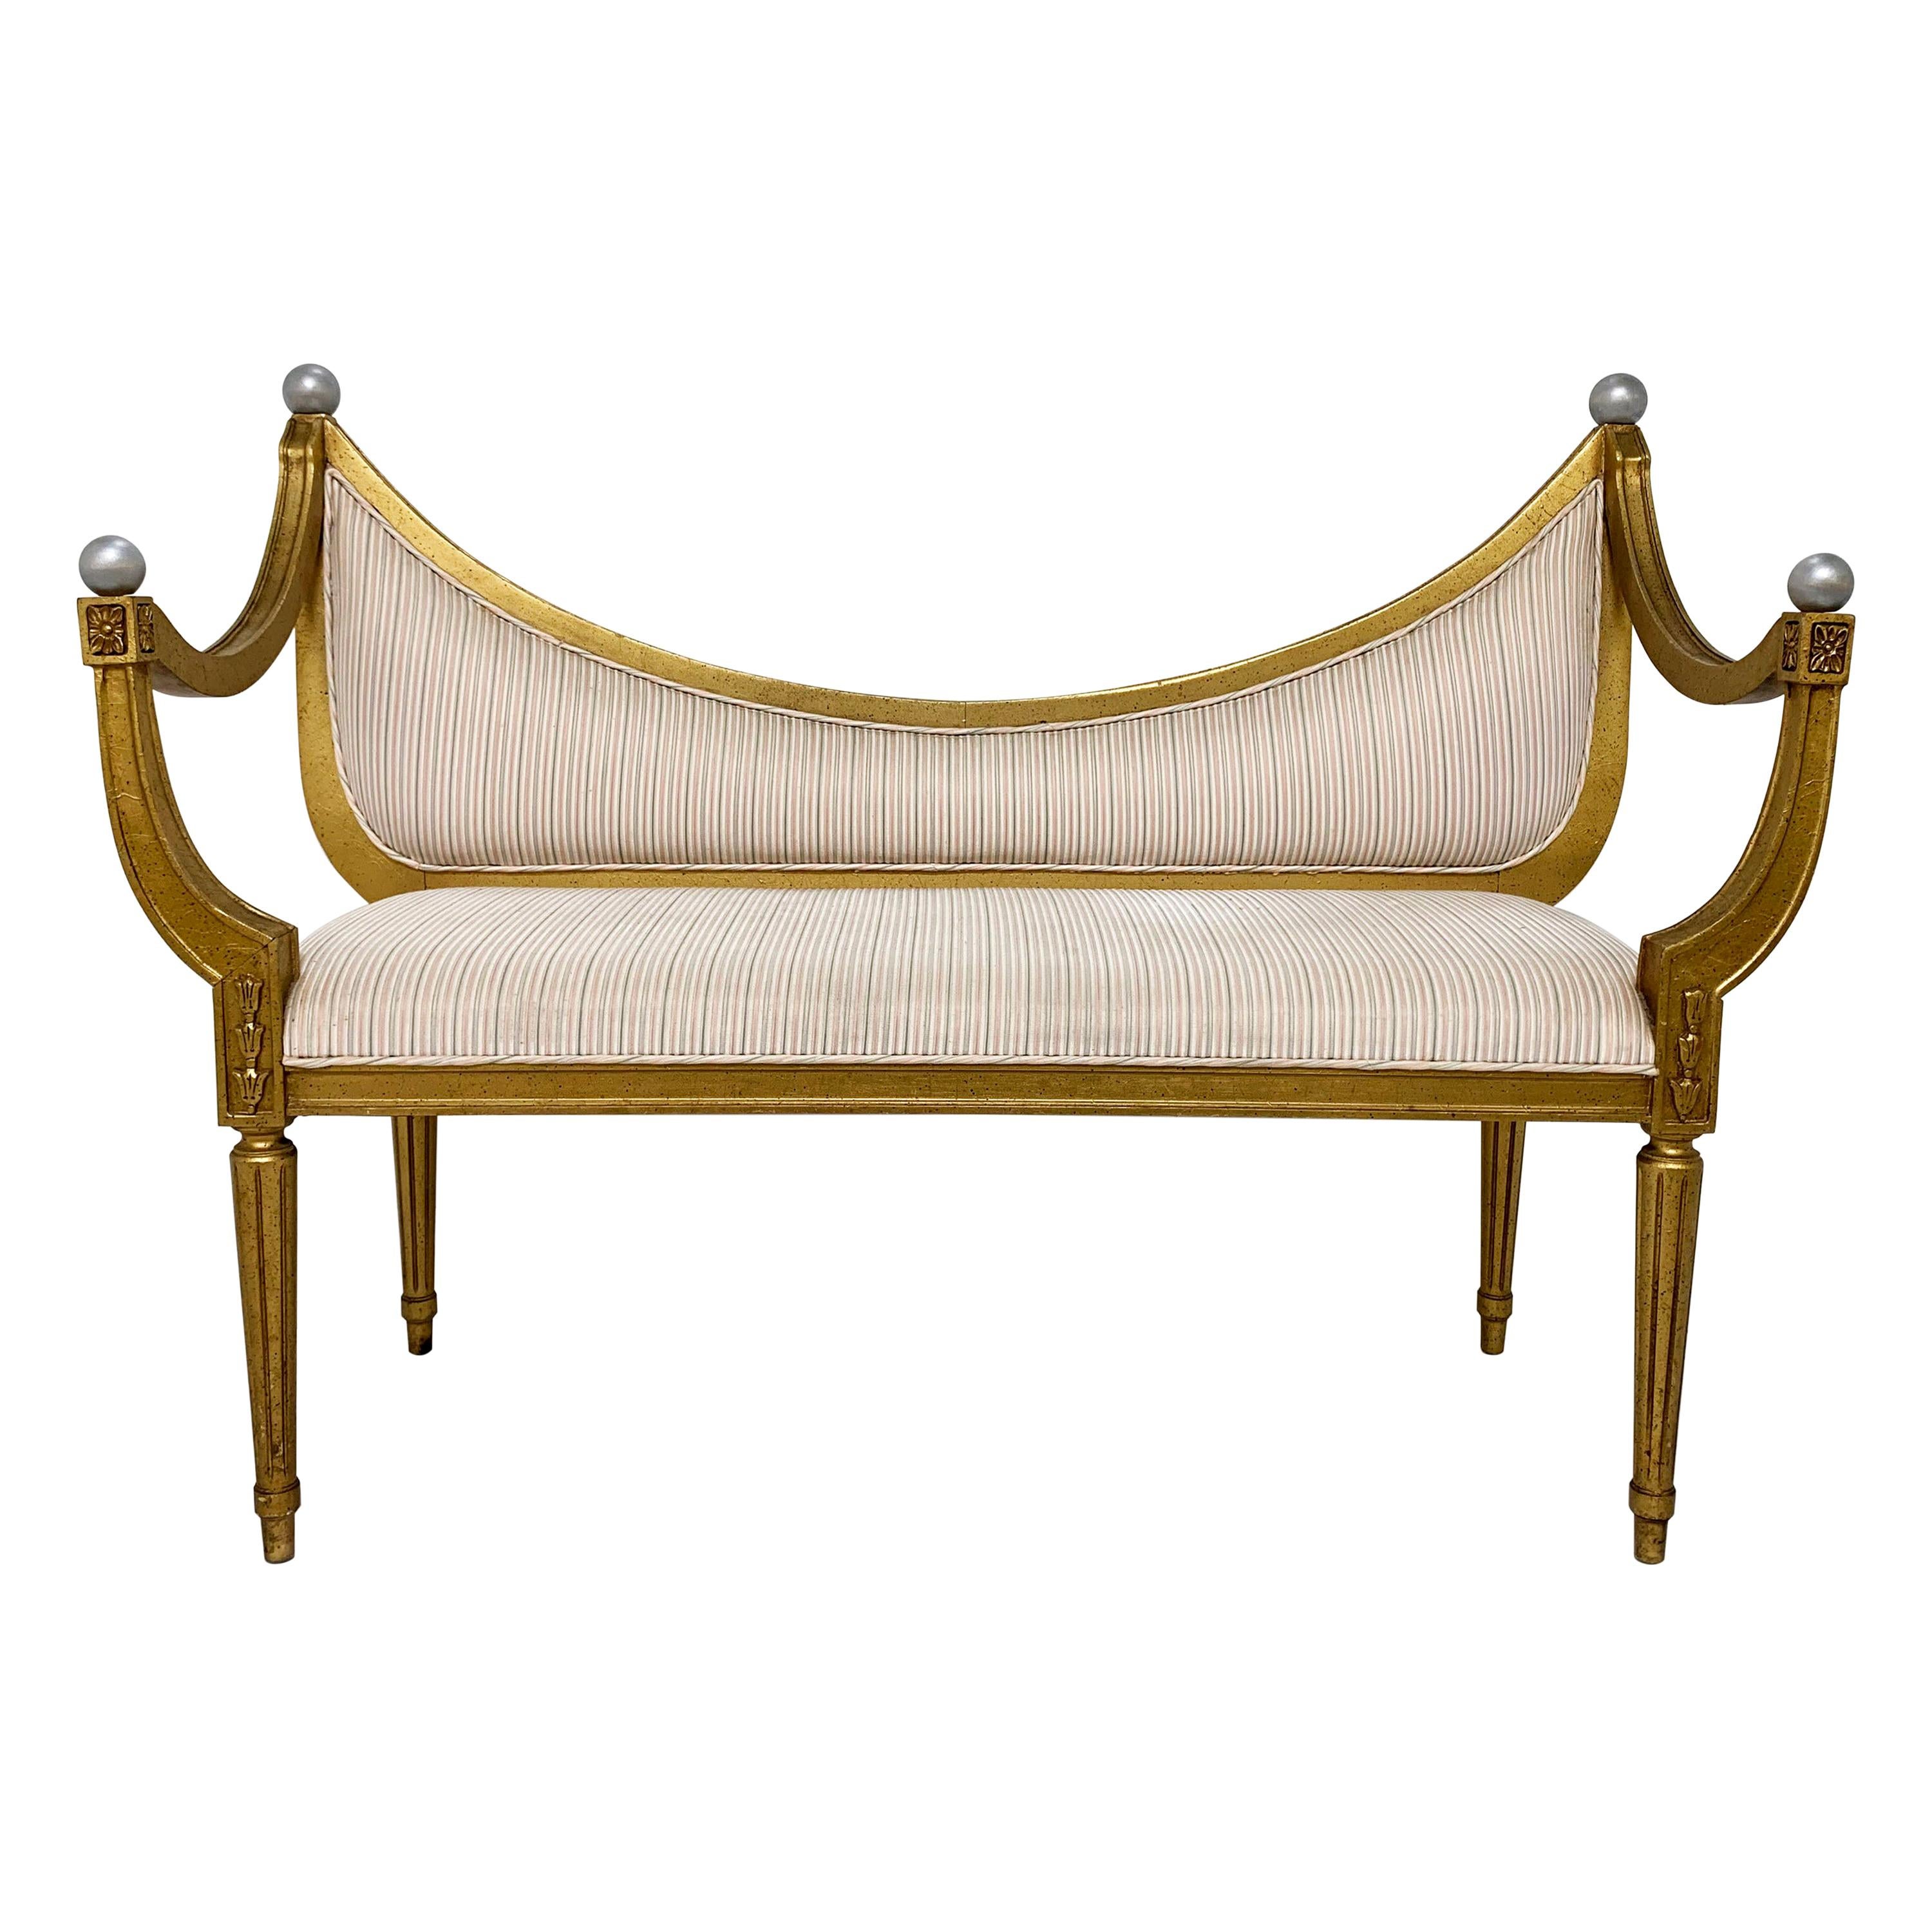 Midcentury Giltwood Settee Bench in the Neoclassical Style, circa 1960s